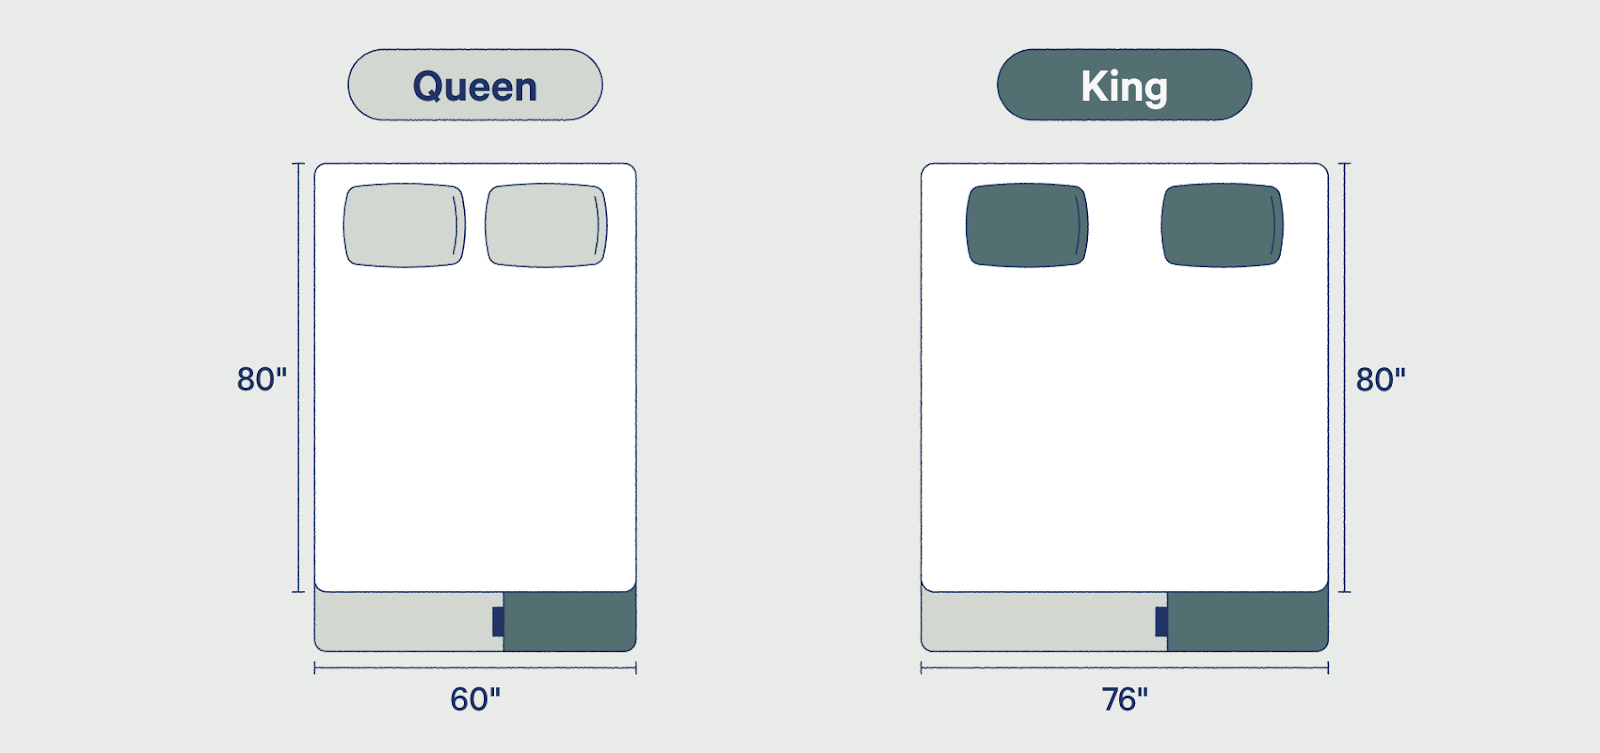 King Vs Queen Bed Size And Comparison, Whats The Measurements Of A King Bed